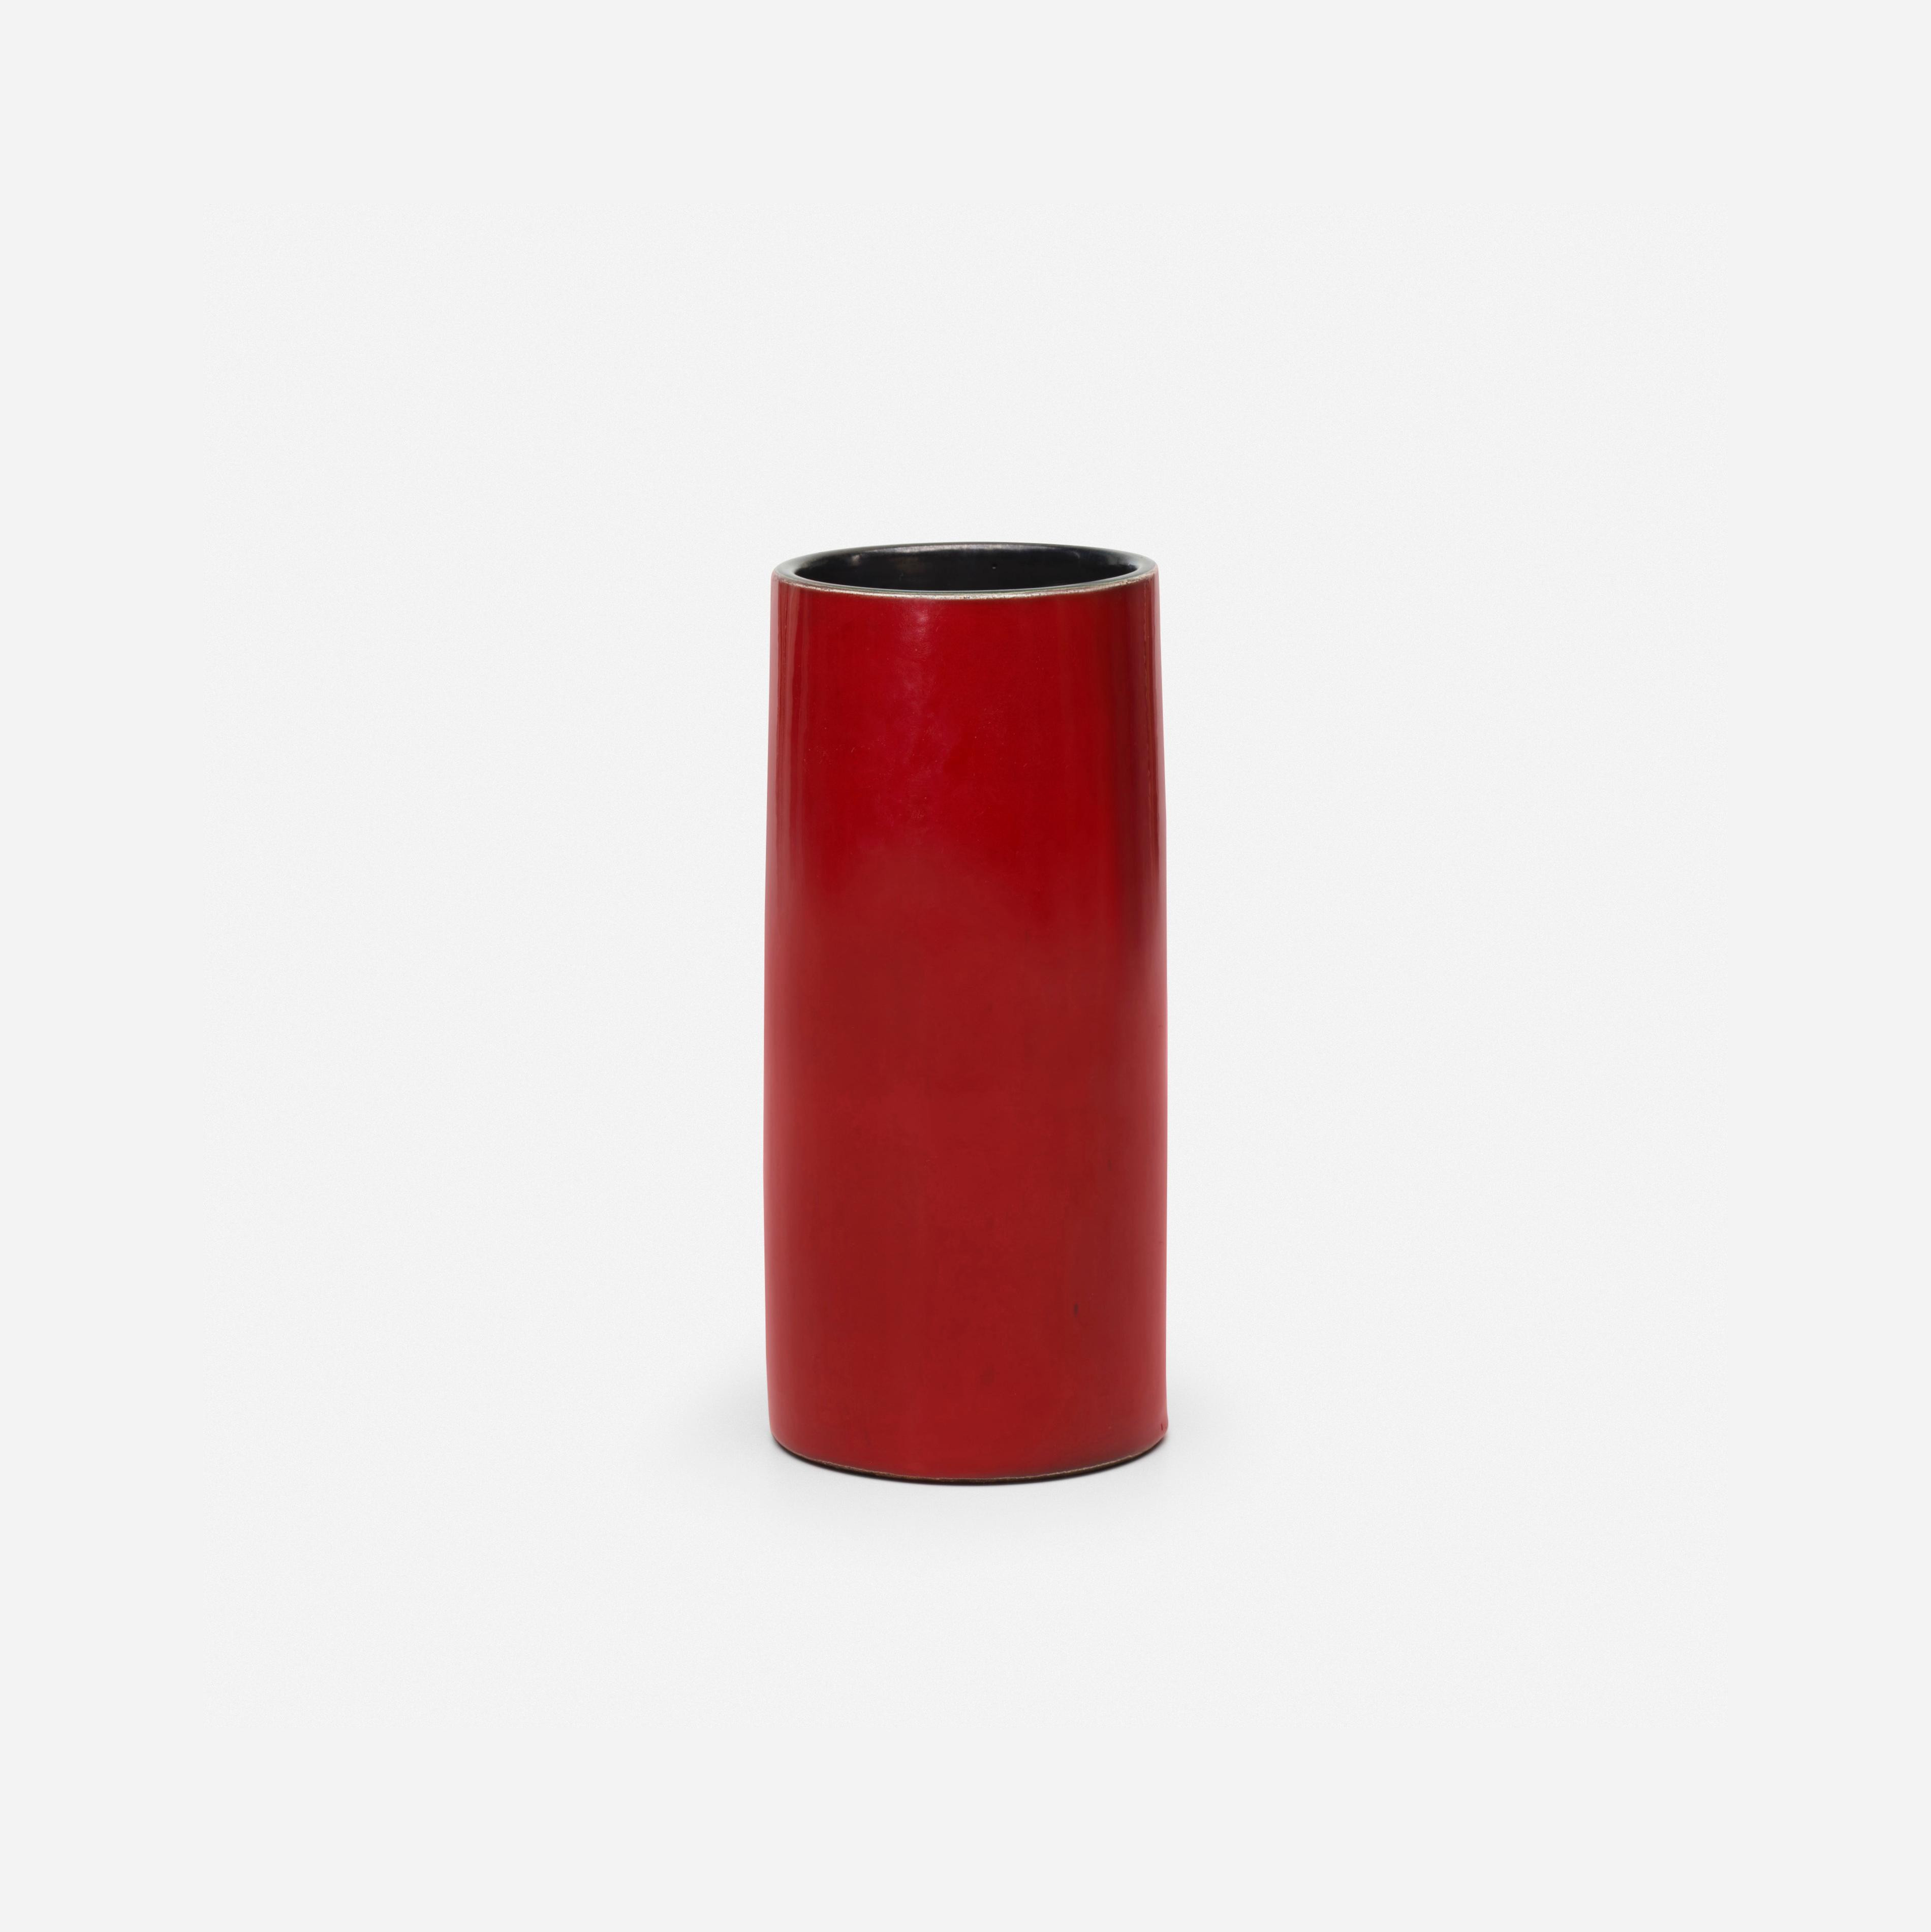 14 Ideal Ettore sottsass Vase 2023 free download ettore sottsass vase of blouin artinfo pertaining to georges jouve vase cylindre